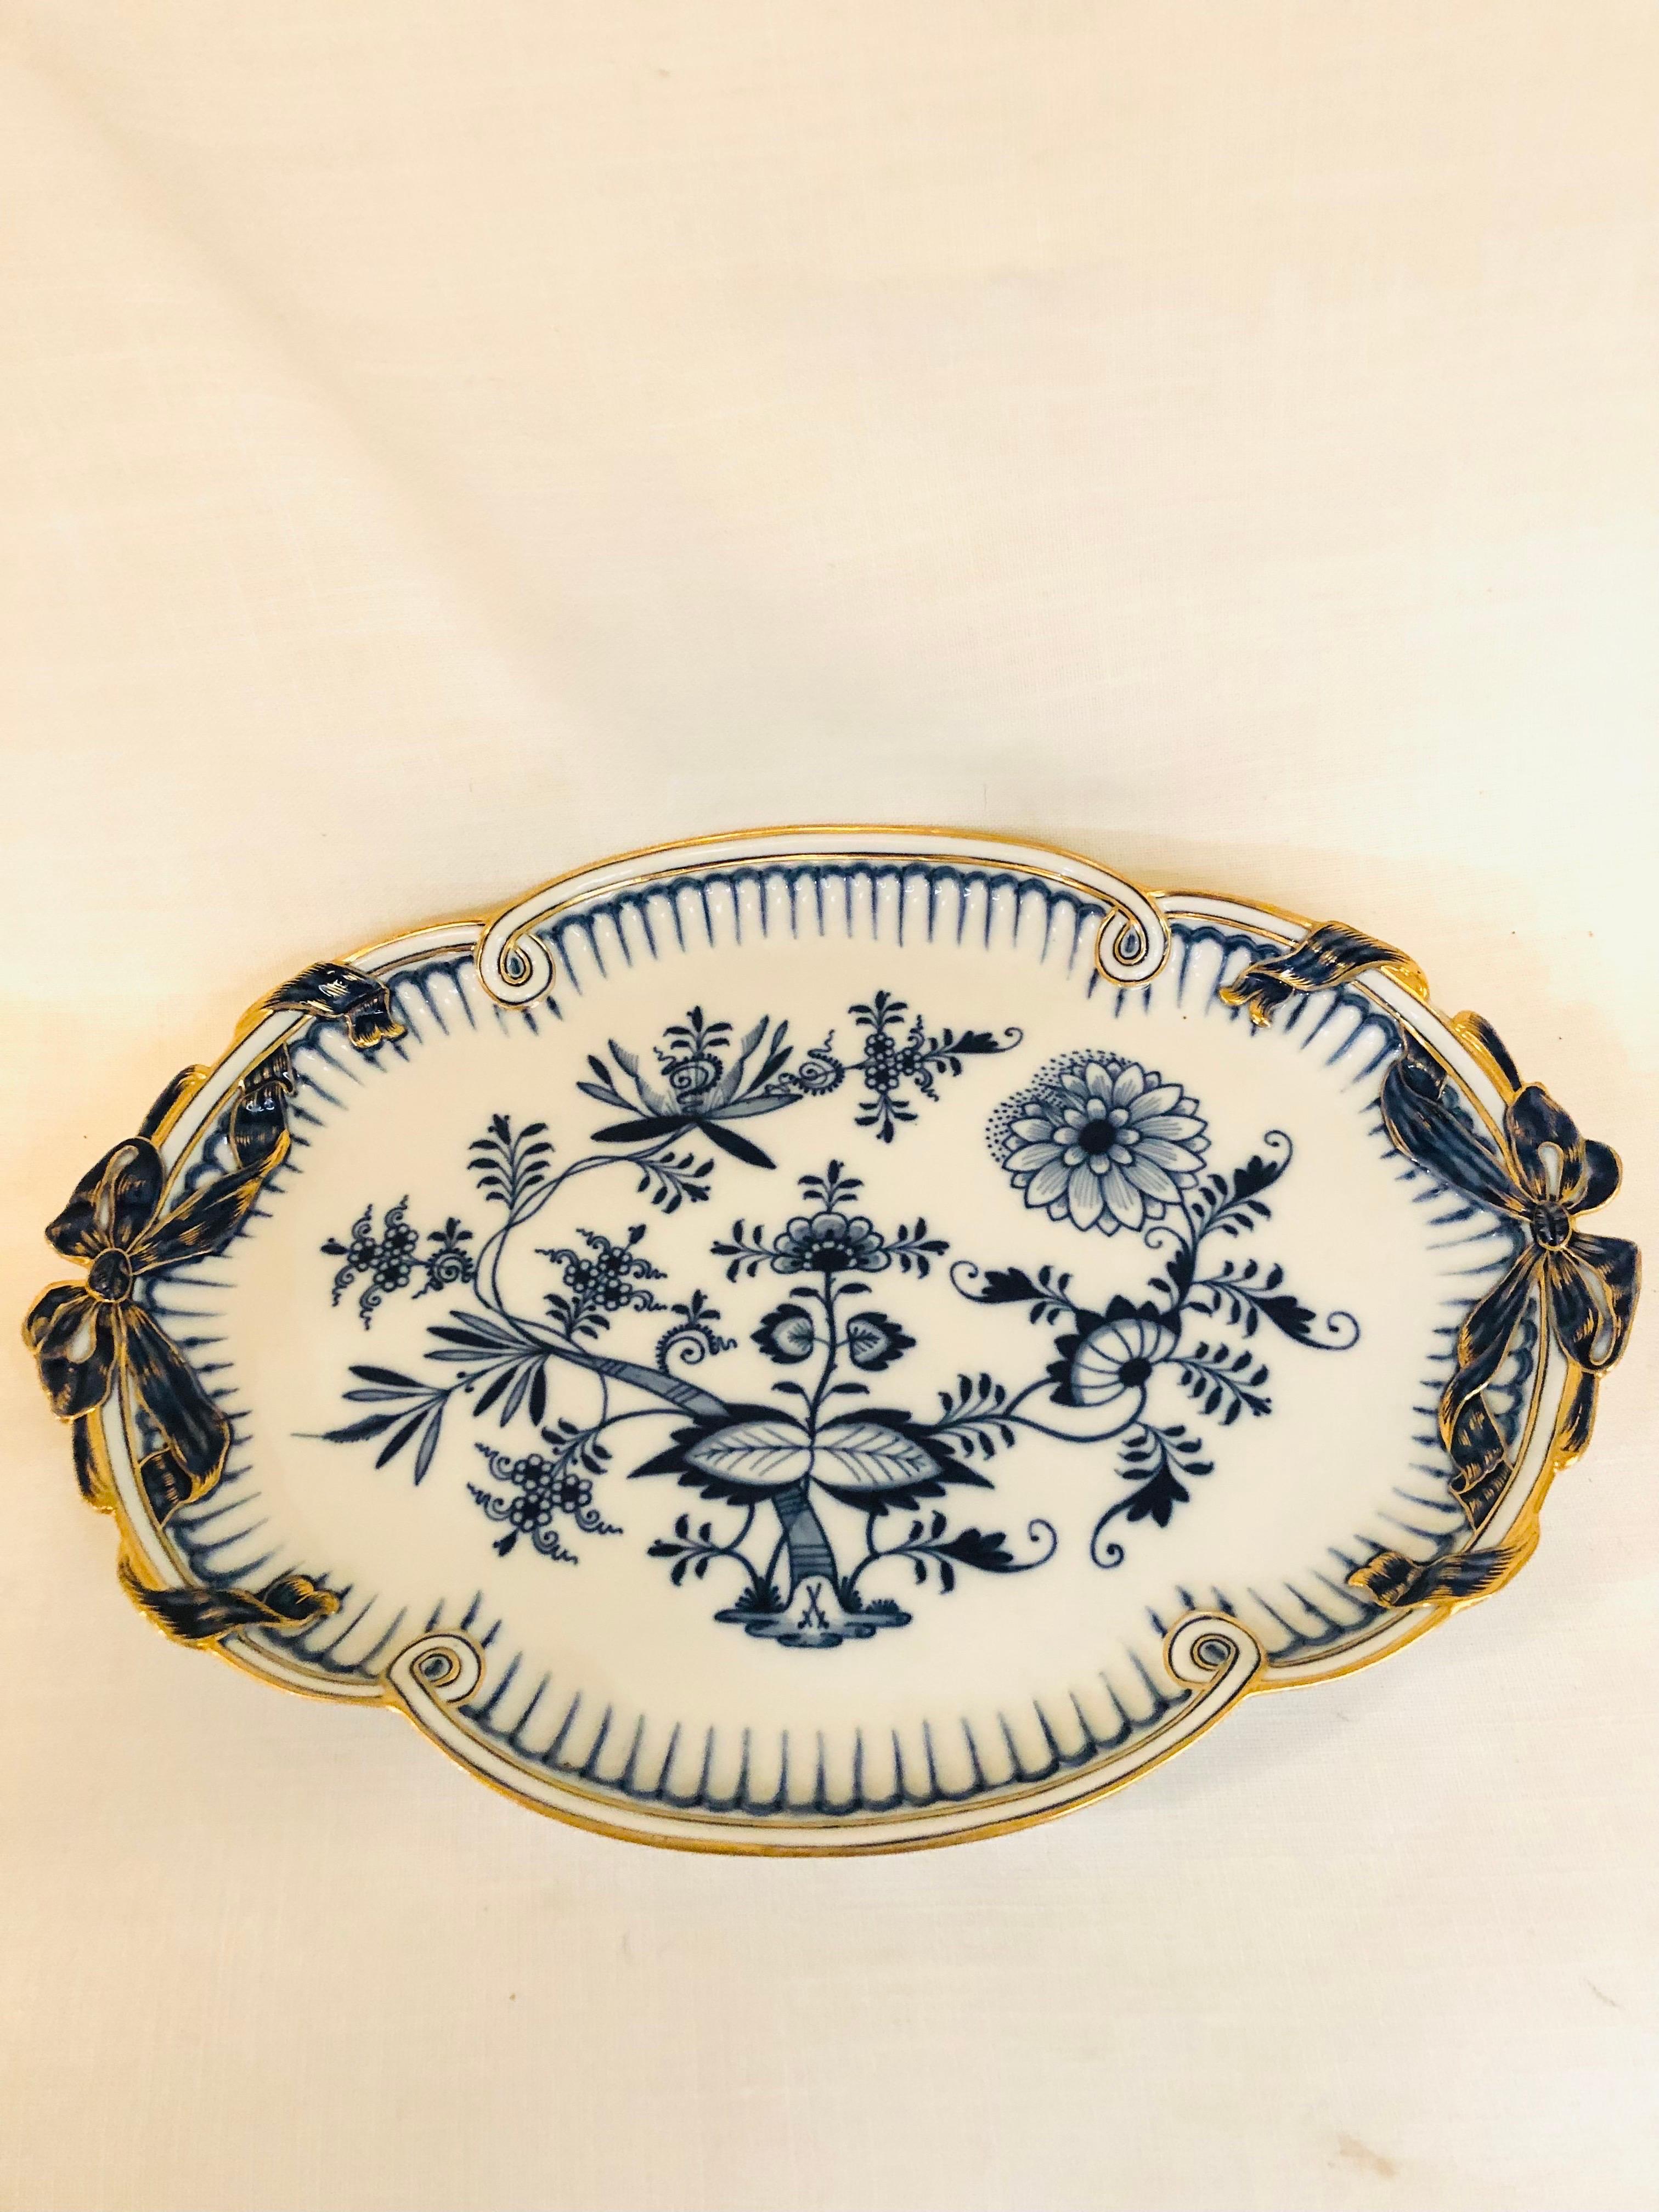 Other Meissen Blue Onion Antique Serving Tray with Gold Border and Bow Handles